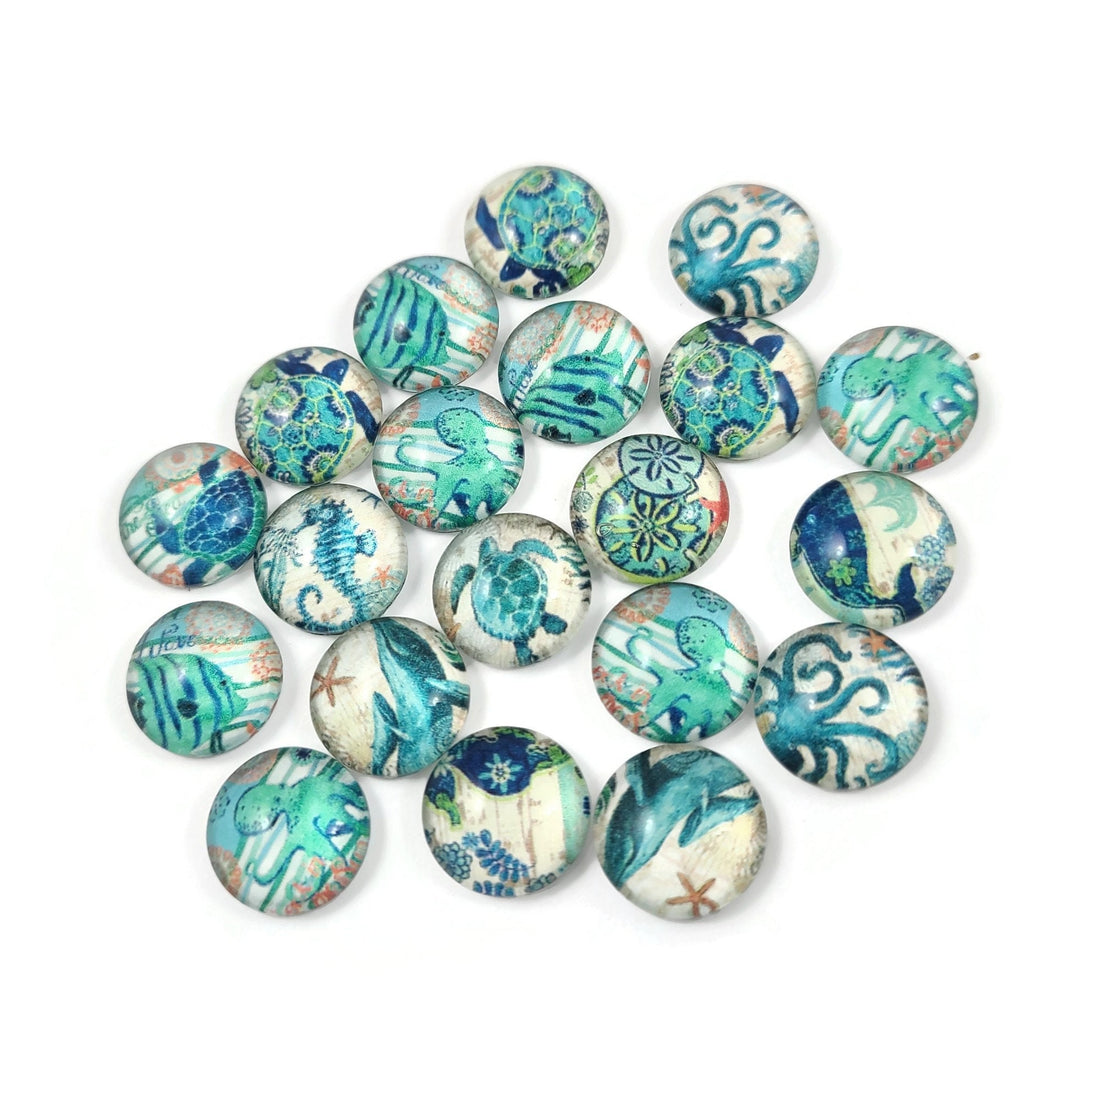 Mixed ocean wildlife glass cabochons - set of 20 round dome cabochons - 10, 12 or 14mm